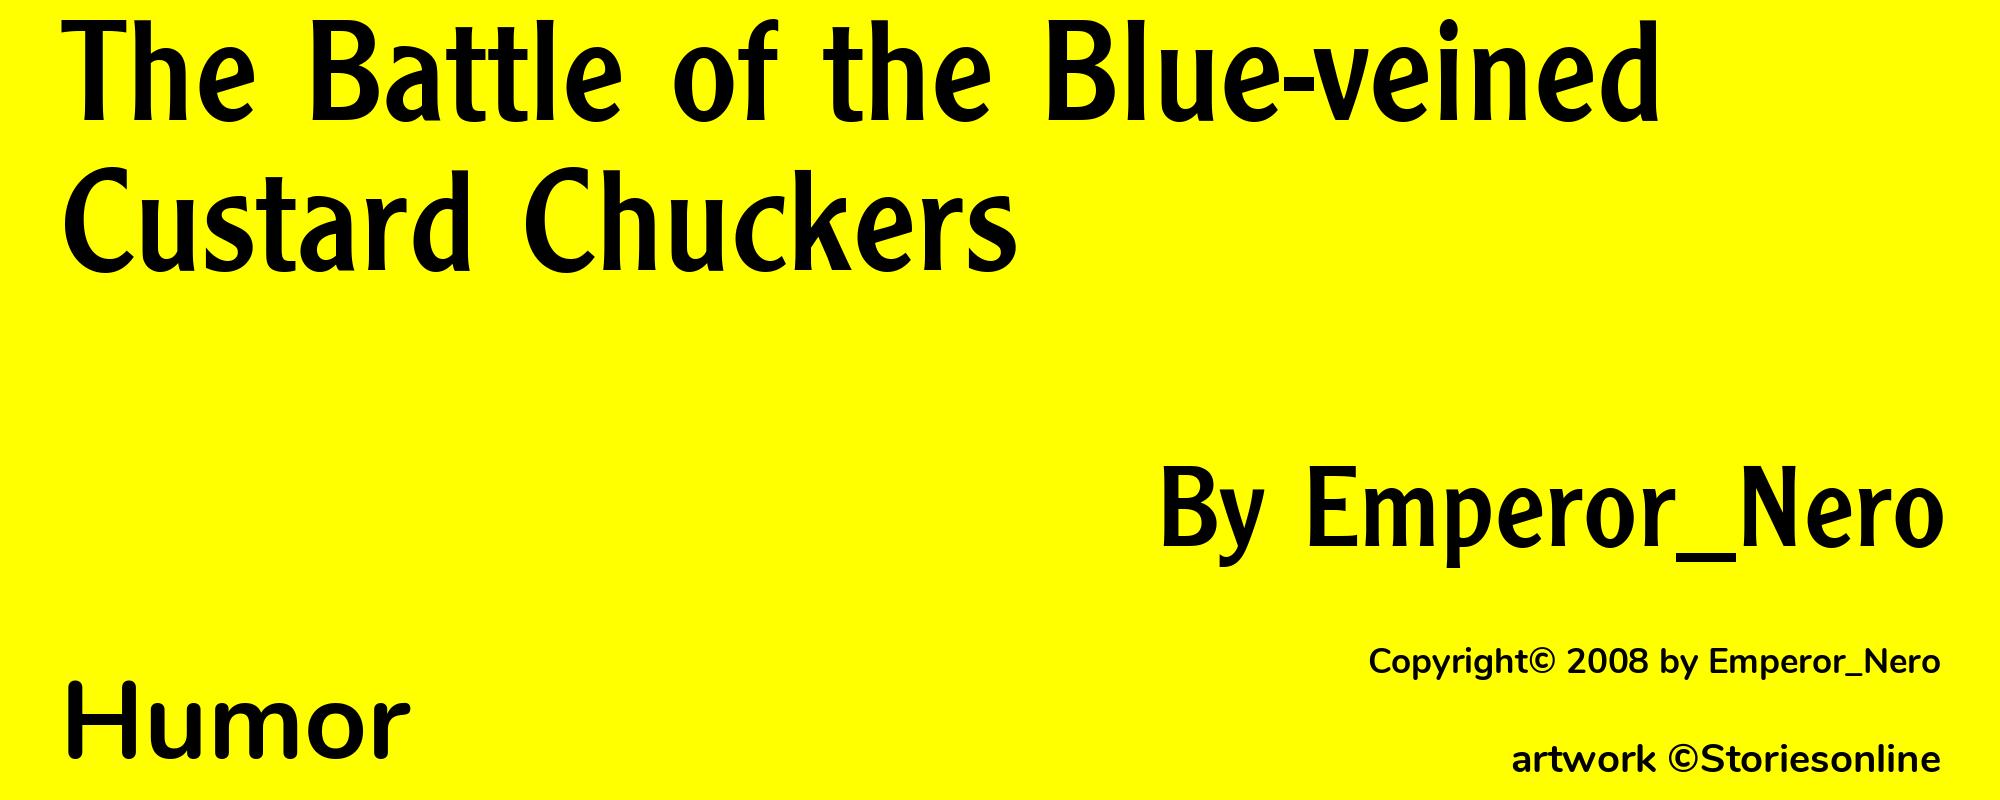 The Battle of the Blue-veined Custard Chuckers - Cover